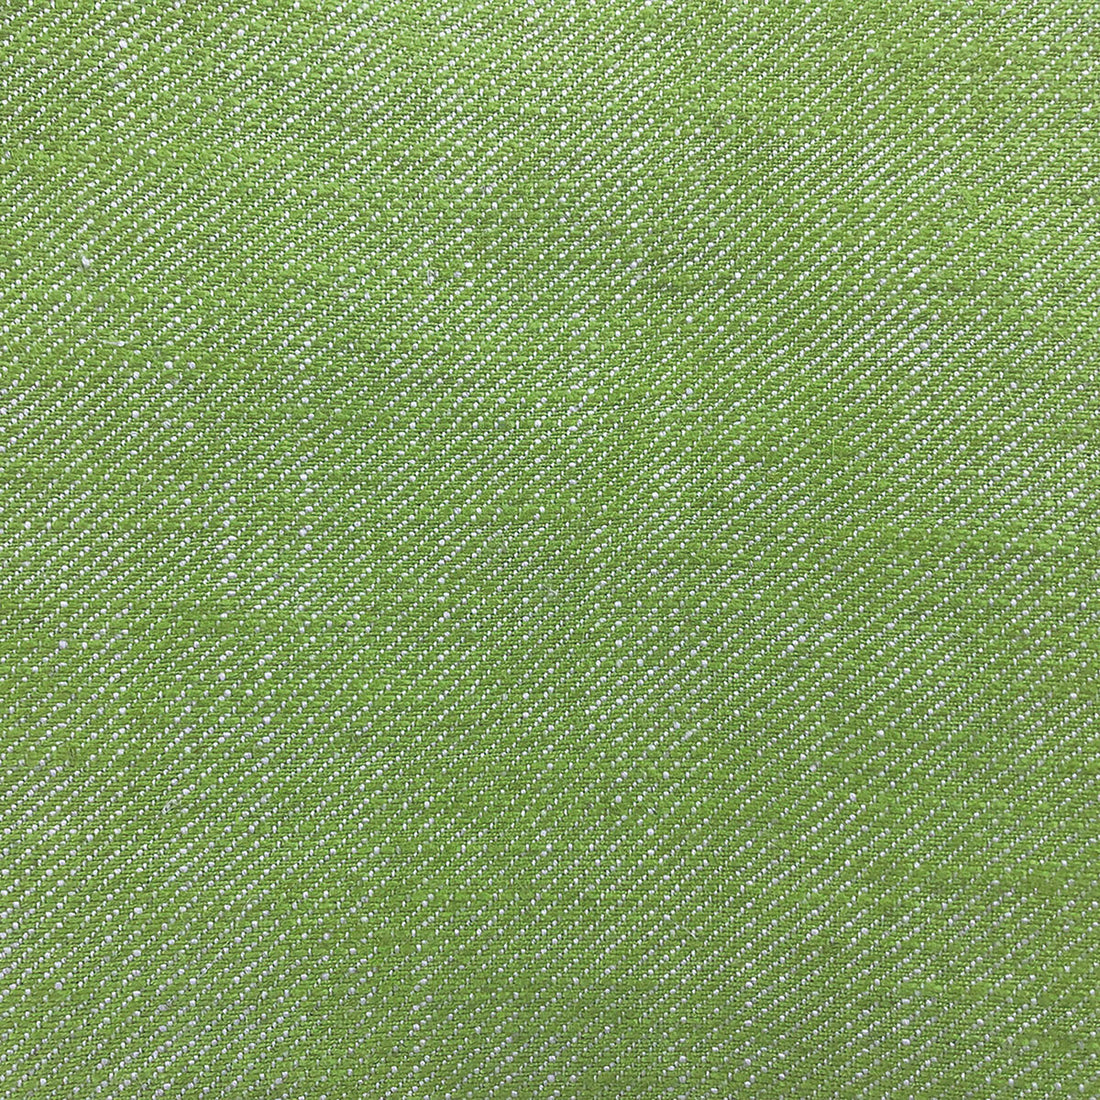 Hisa fabric in verde manzana color - pattern GDT5639.019.0 - by Gaston y Daniela in the Gaston Japon collection